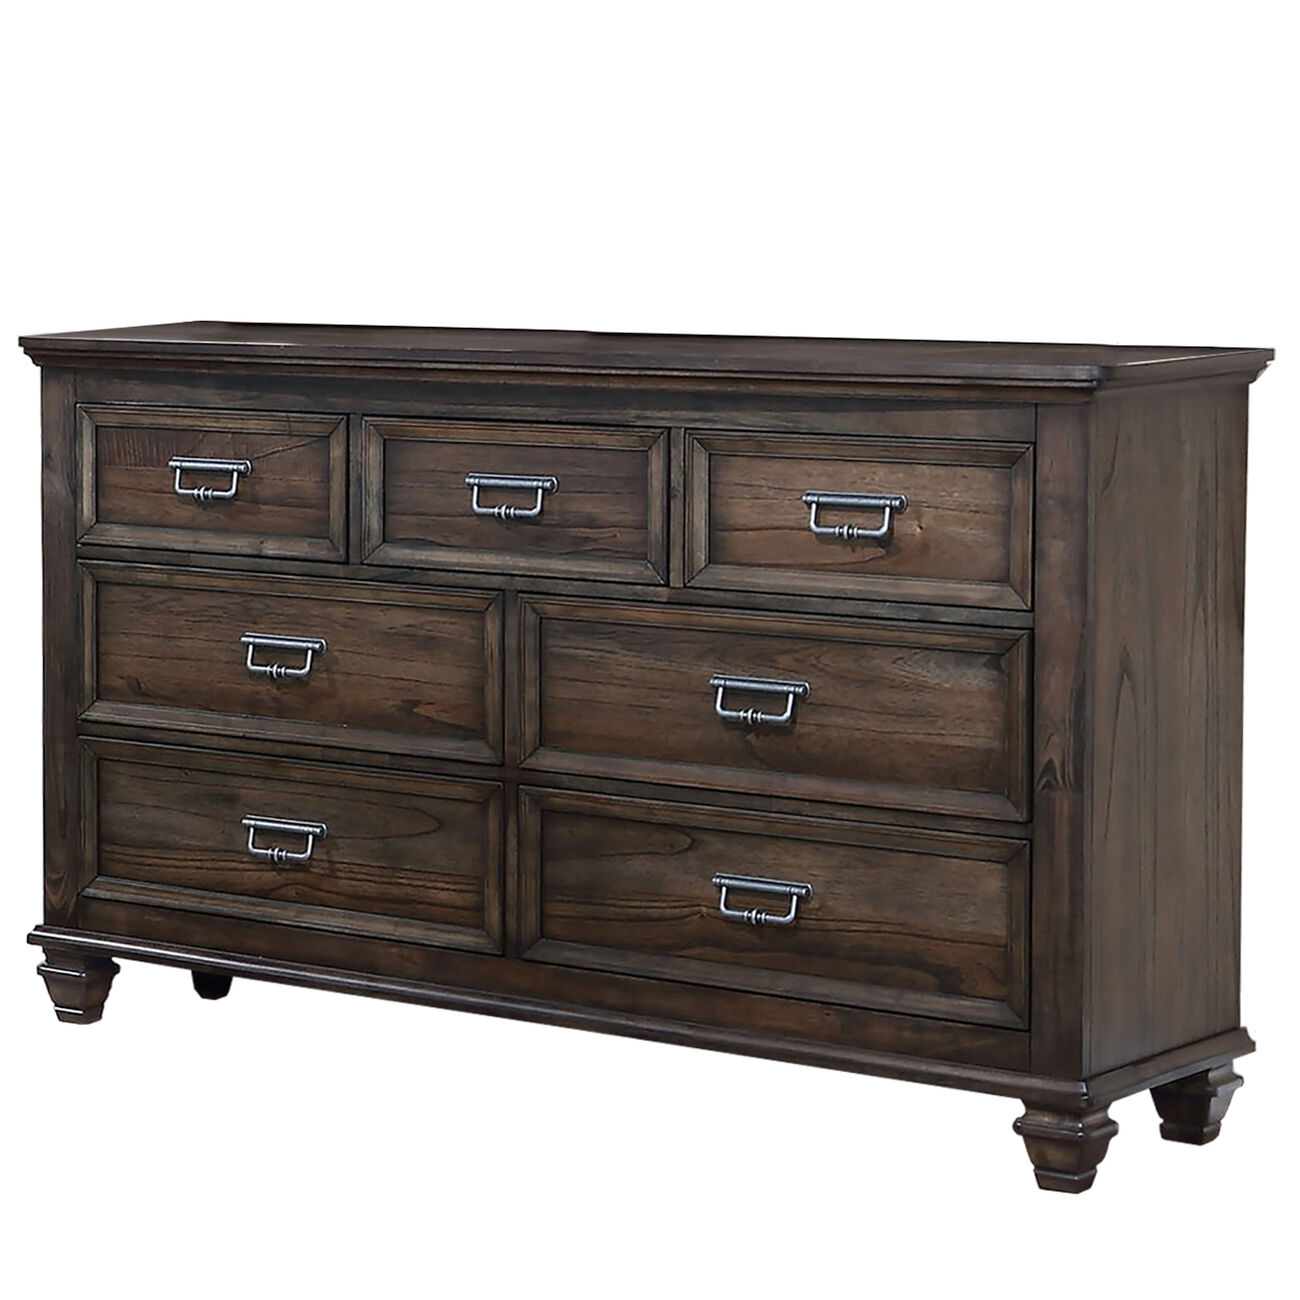 Grained Wooden Frame Dresser with 7 Drawers and Tapered Legs, Brown